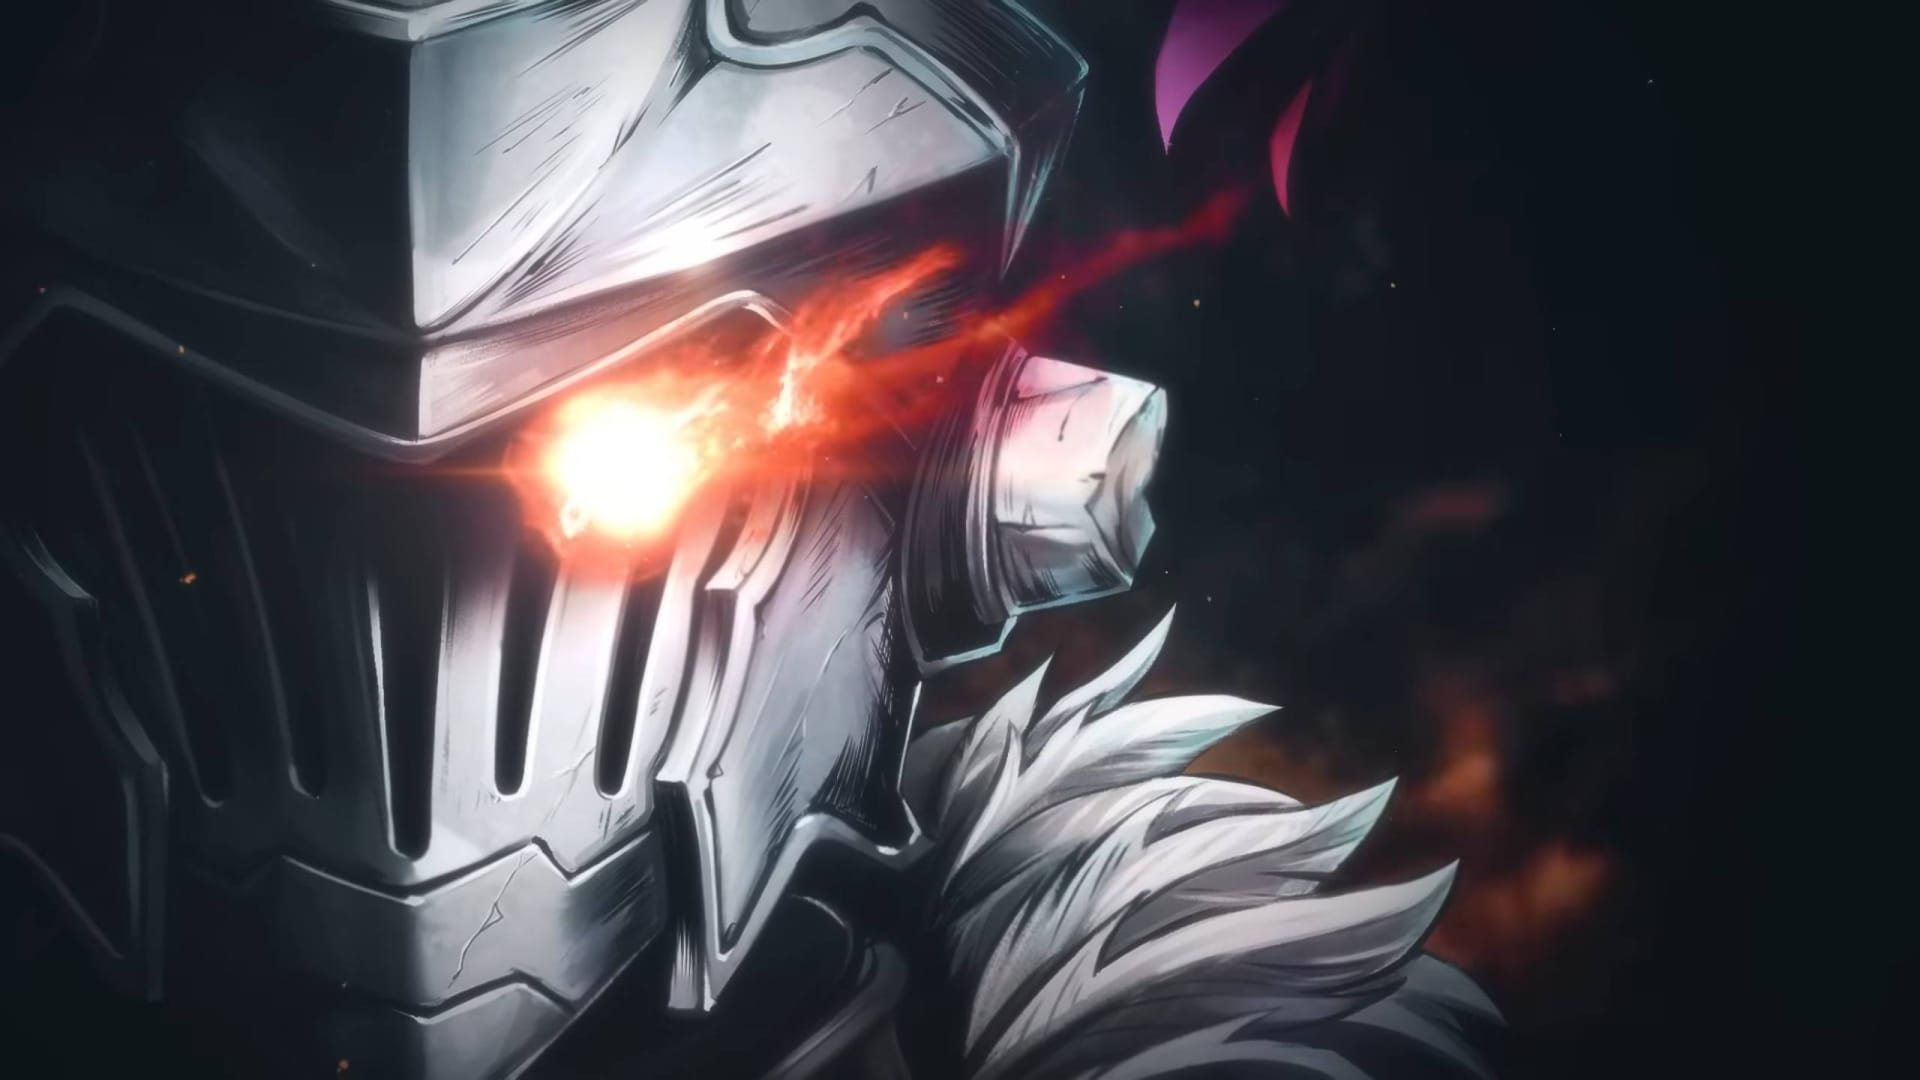 Goblin Slayer - Who's your favorite character!?